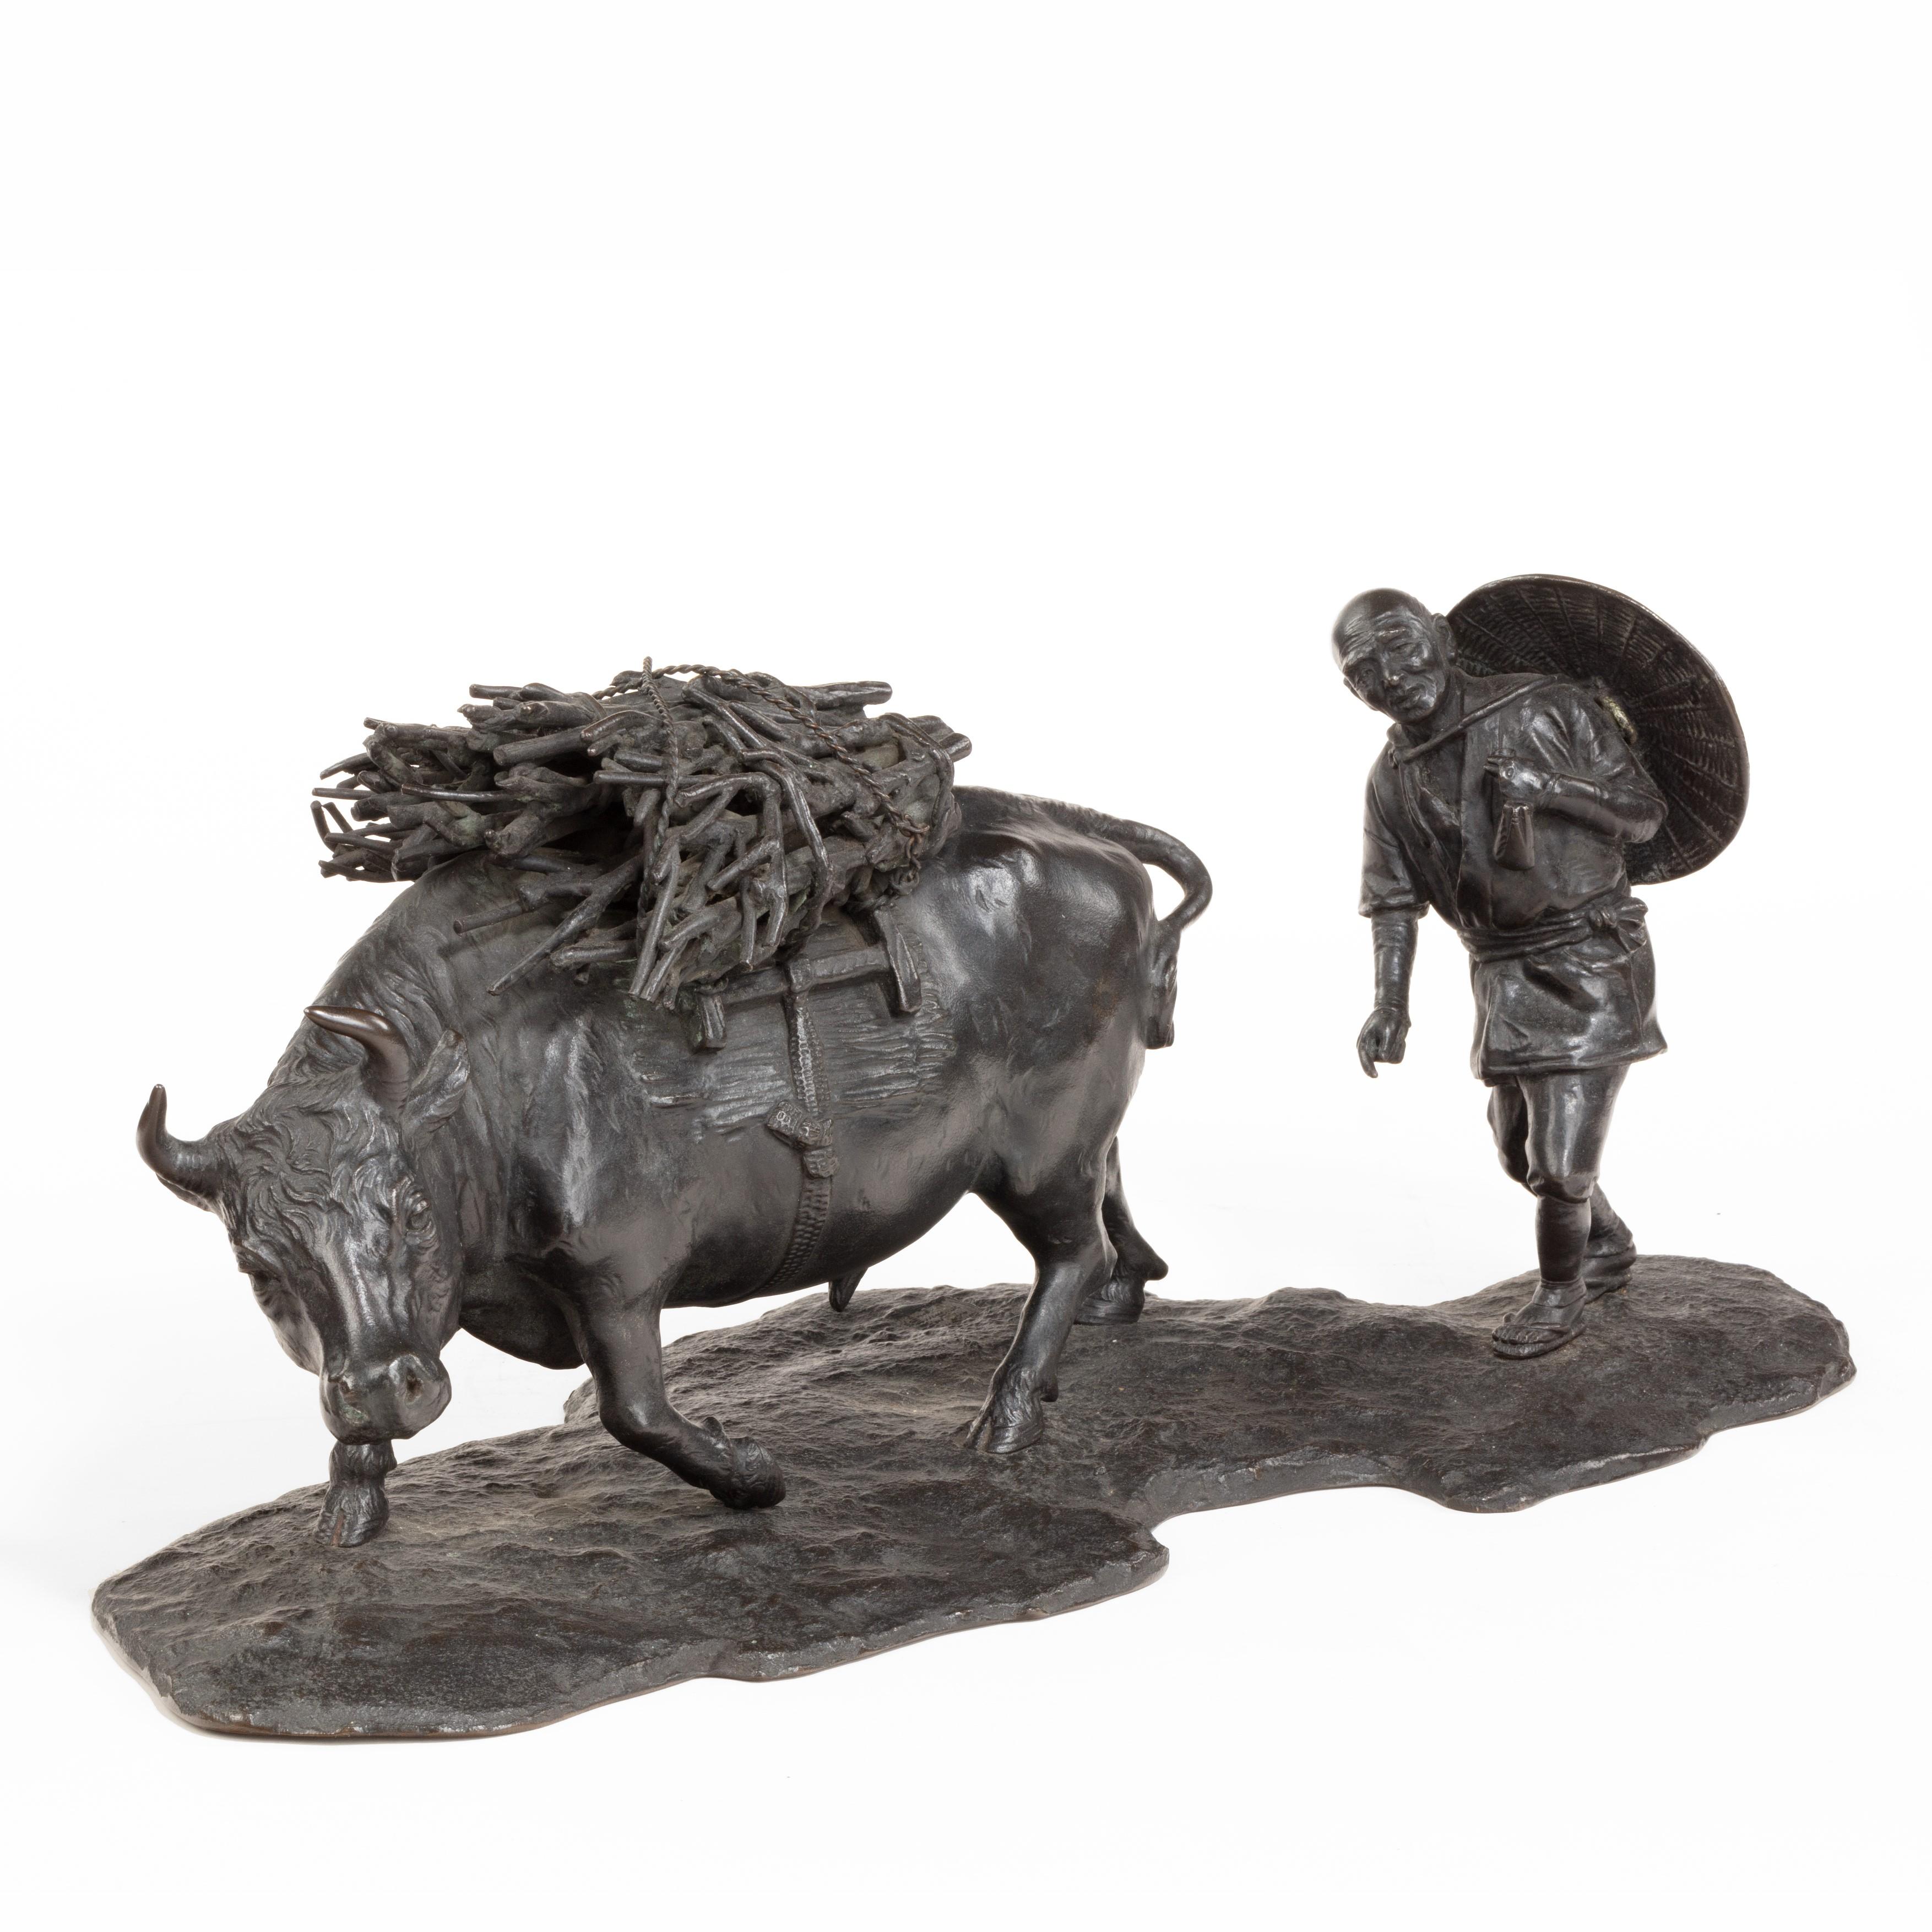 A signed Japanese bronze of a farmer with an ox, the man with a large hat slung over his back walking behind an ox with a bundle of firewood strapped to frame on his back, circa 1940.
Impressed signature.